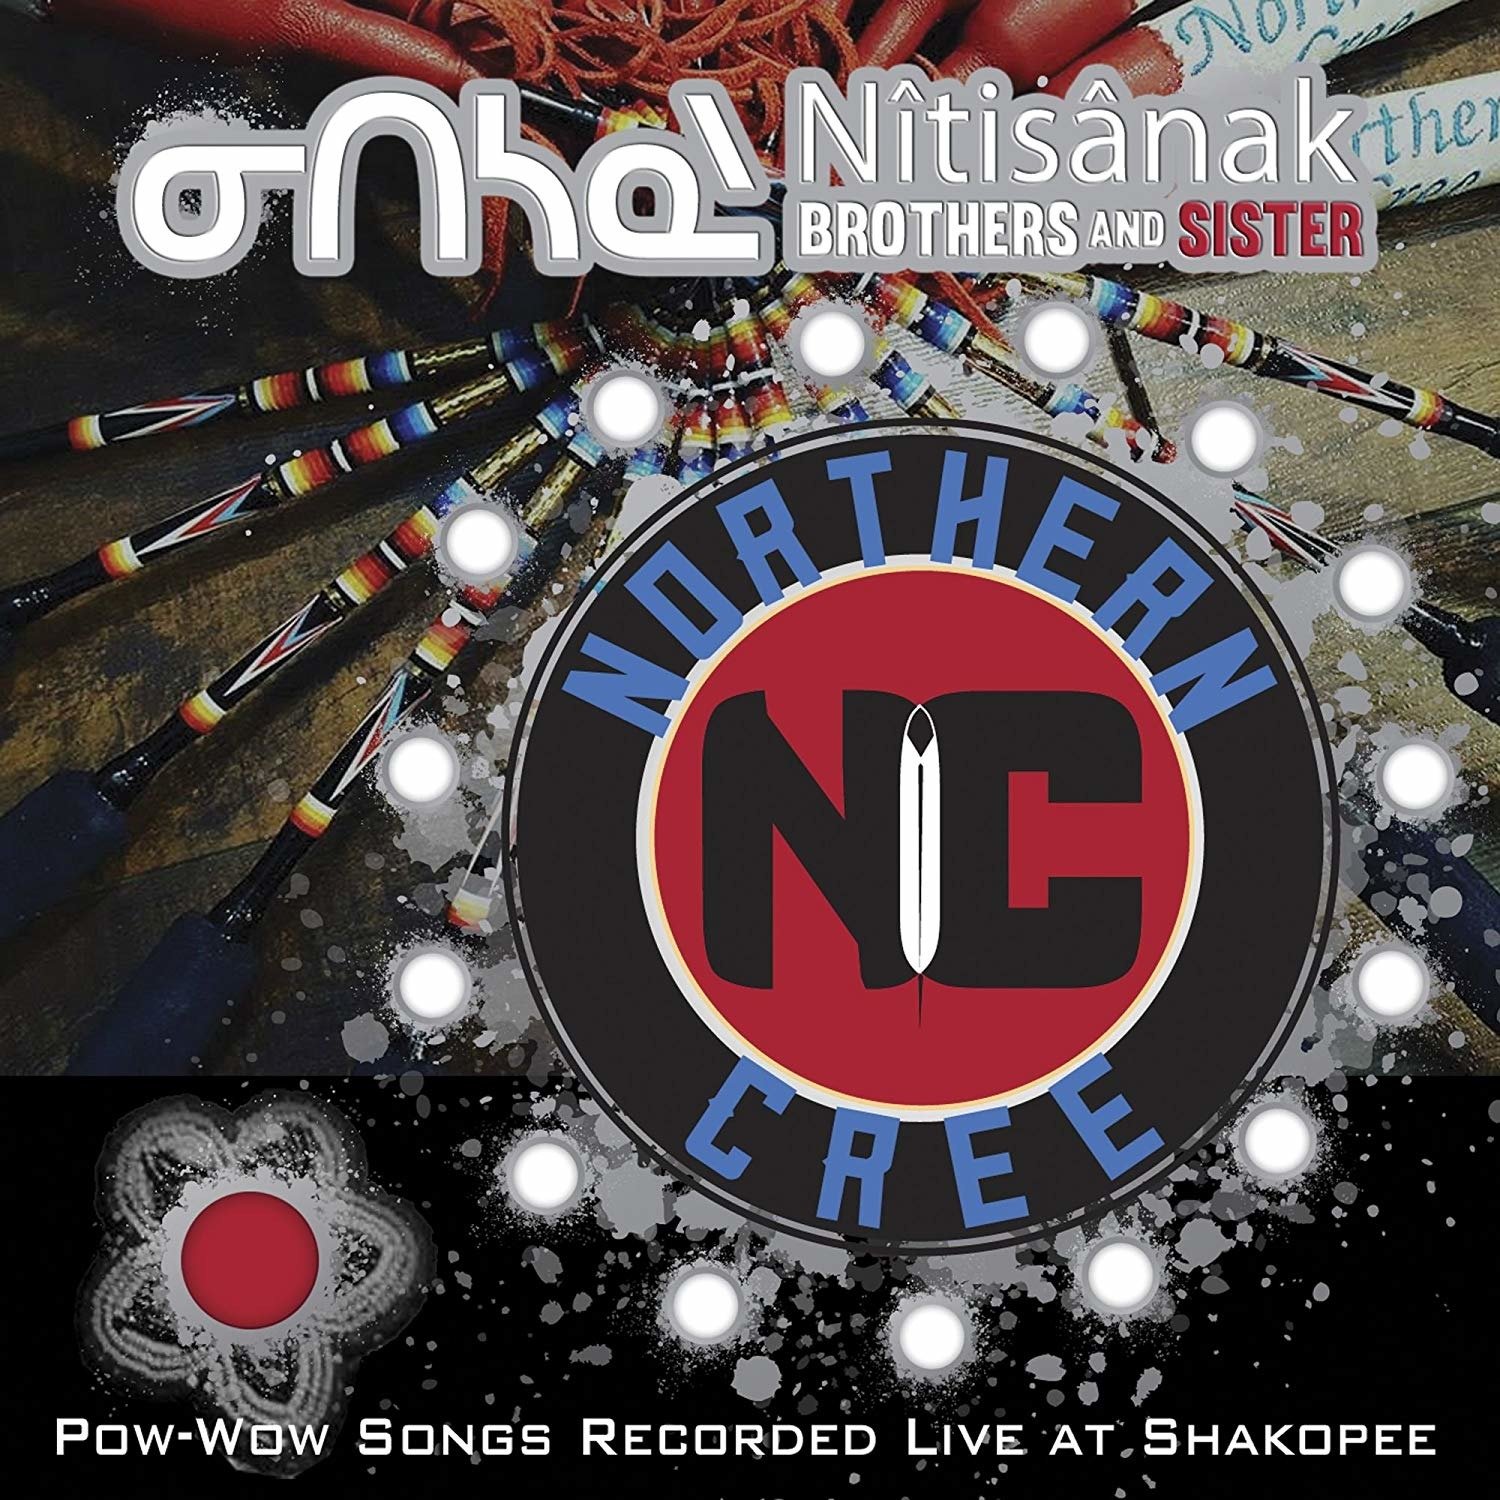 CD Shop - NORTHERN CREE NITISANAK - BROTHERS AND SISTERS